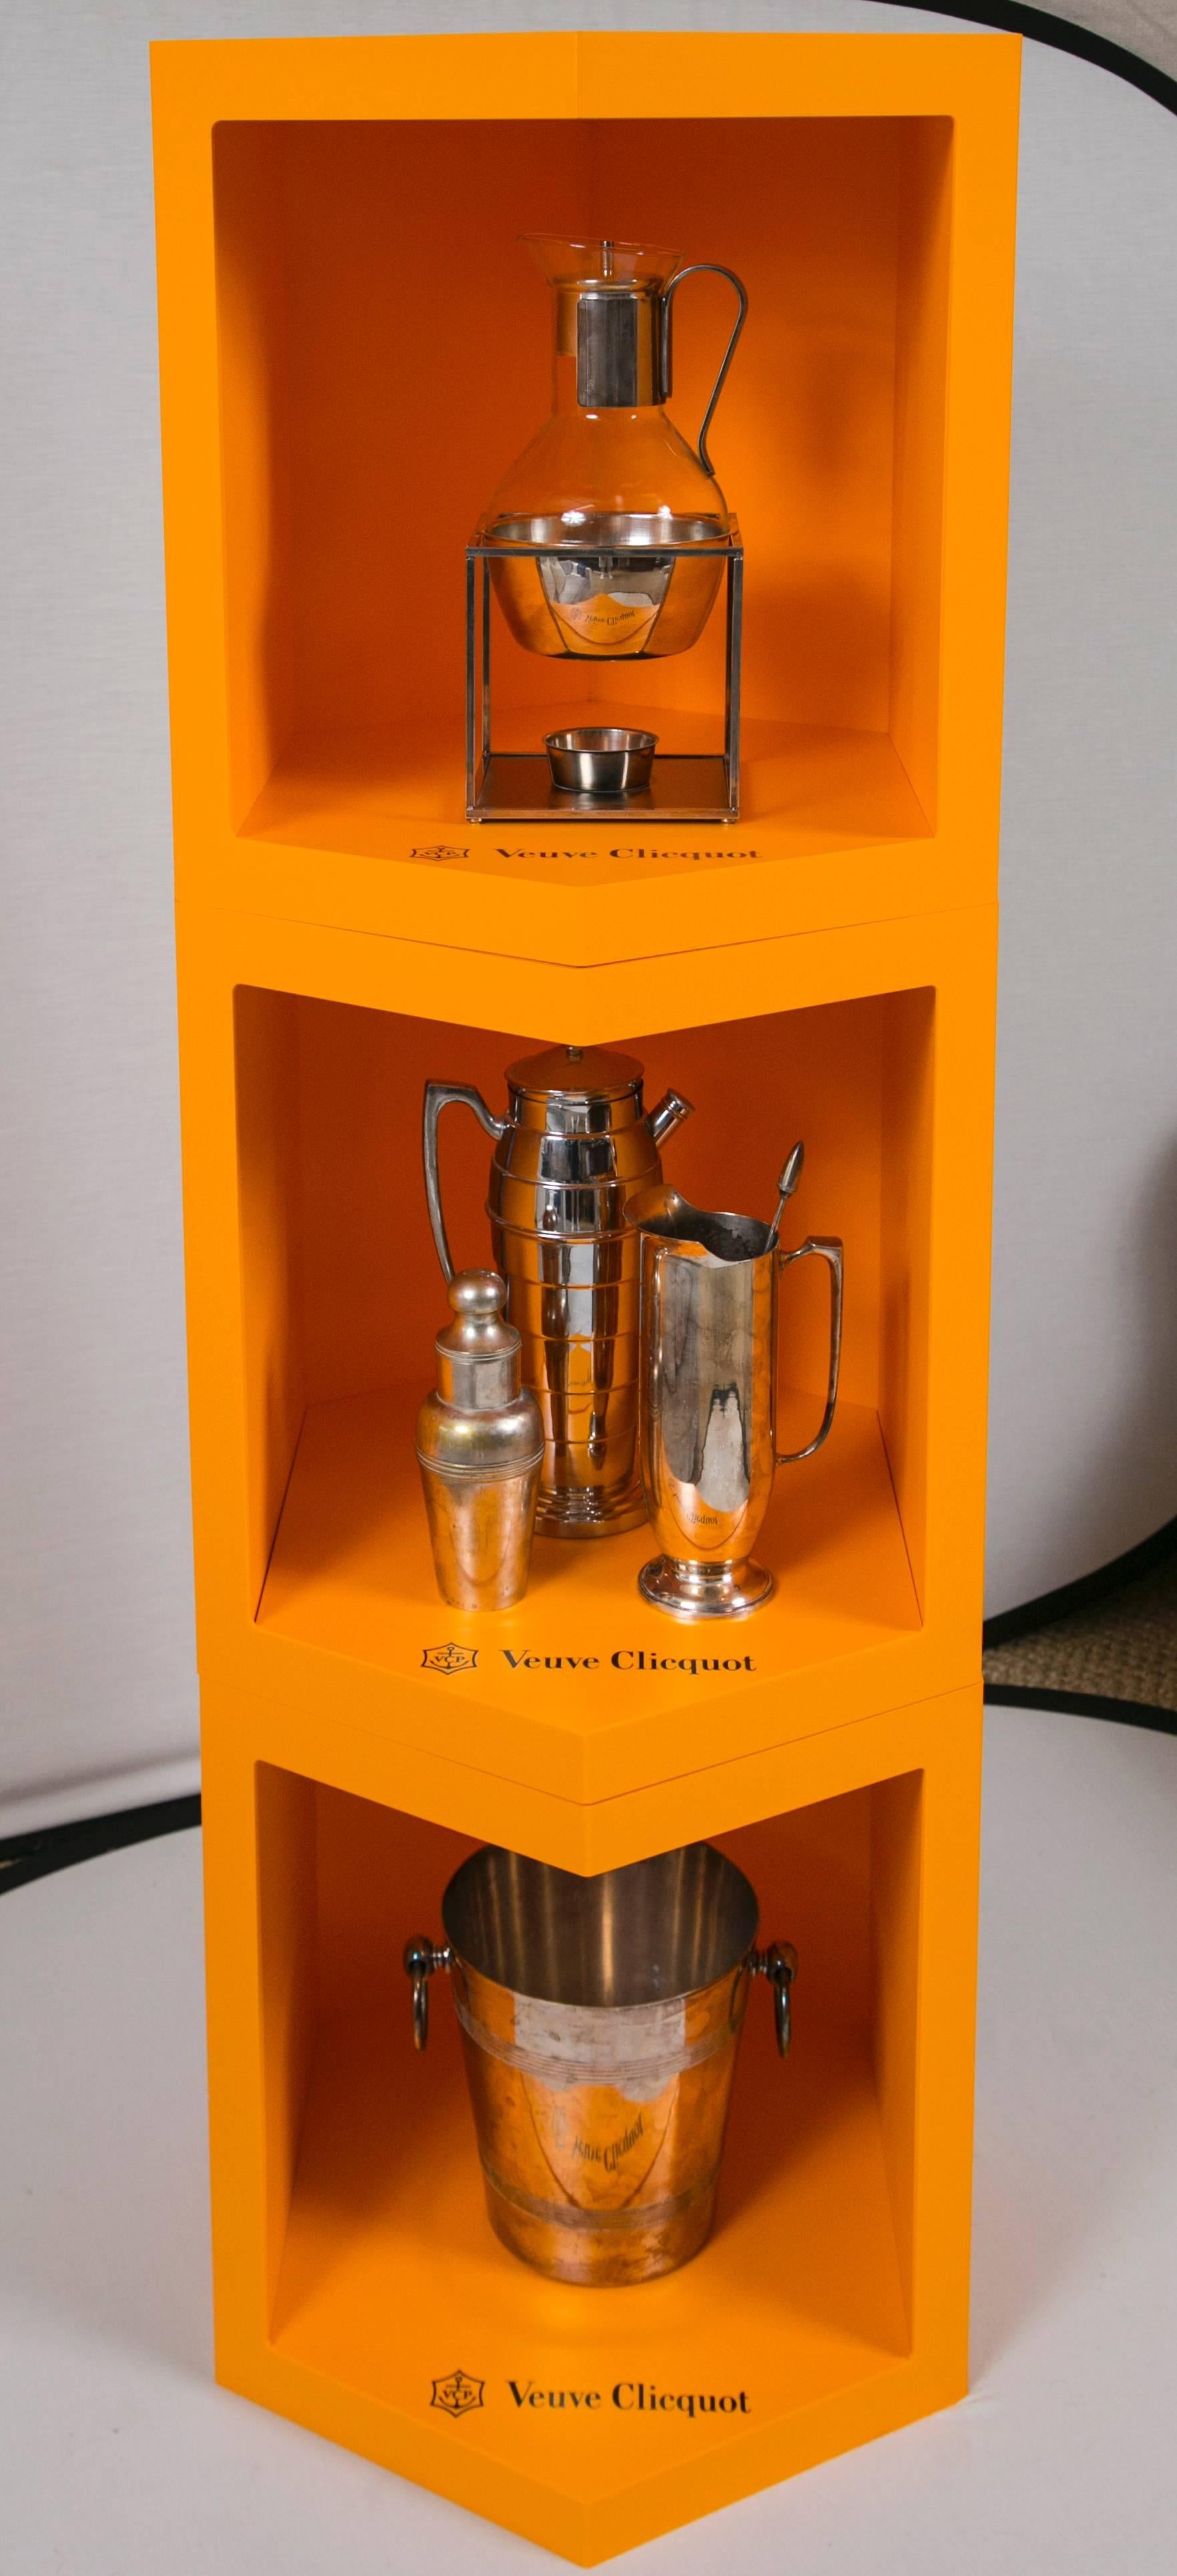 Contemporary Veuve Clicquot Promotional Display Box